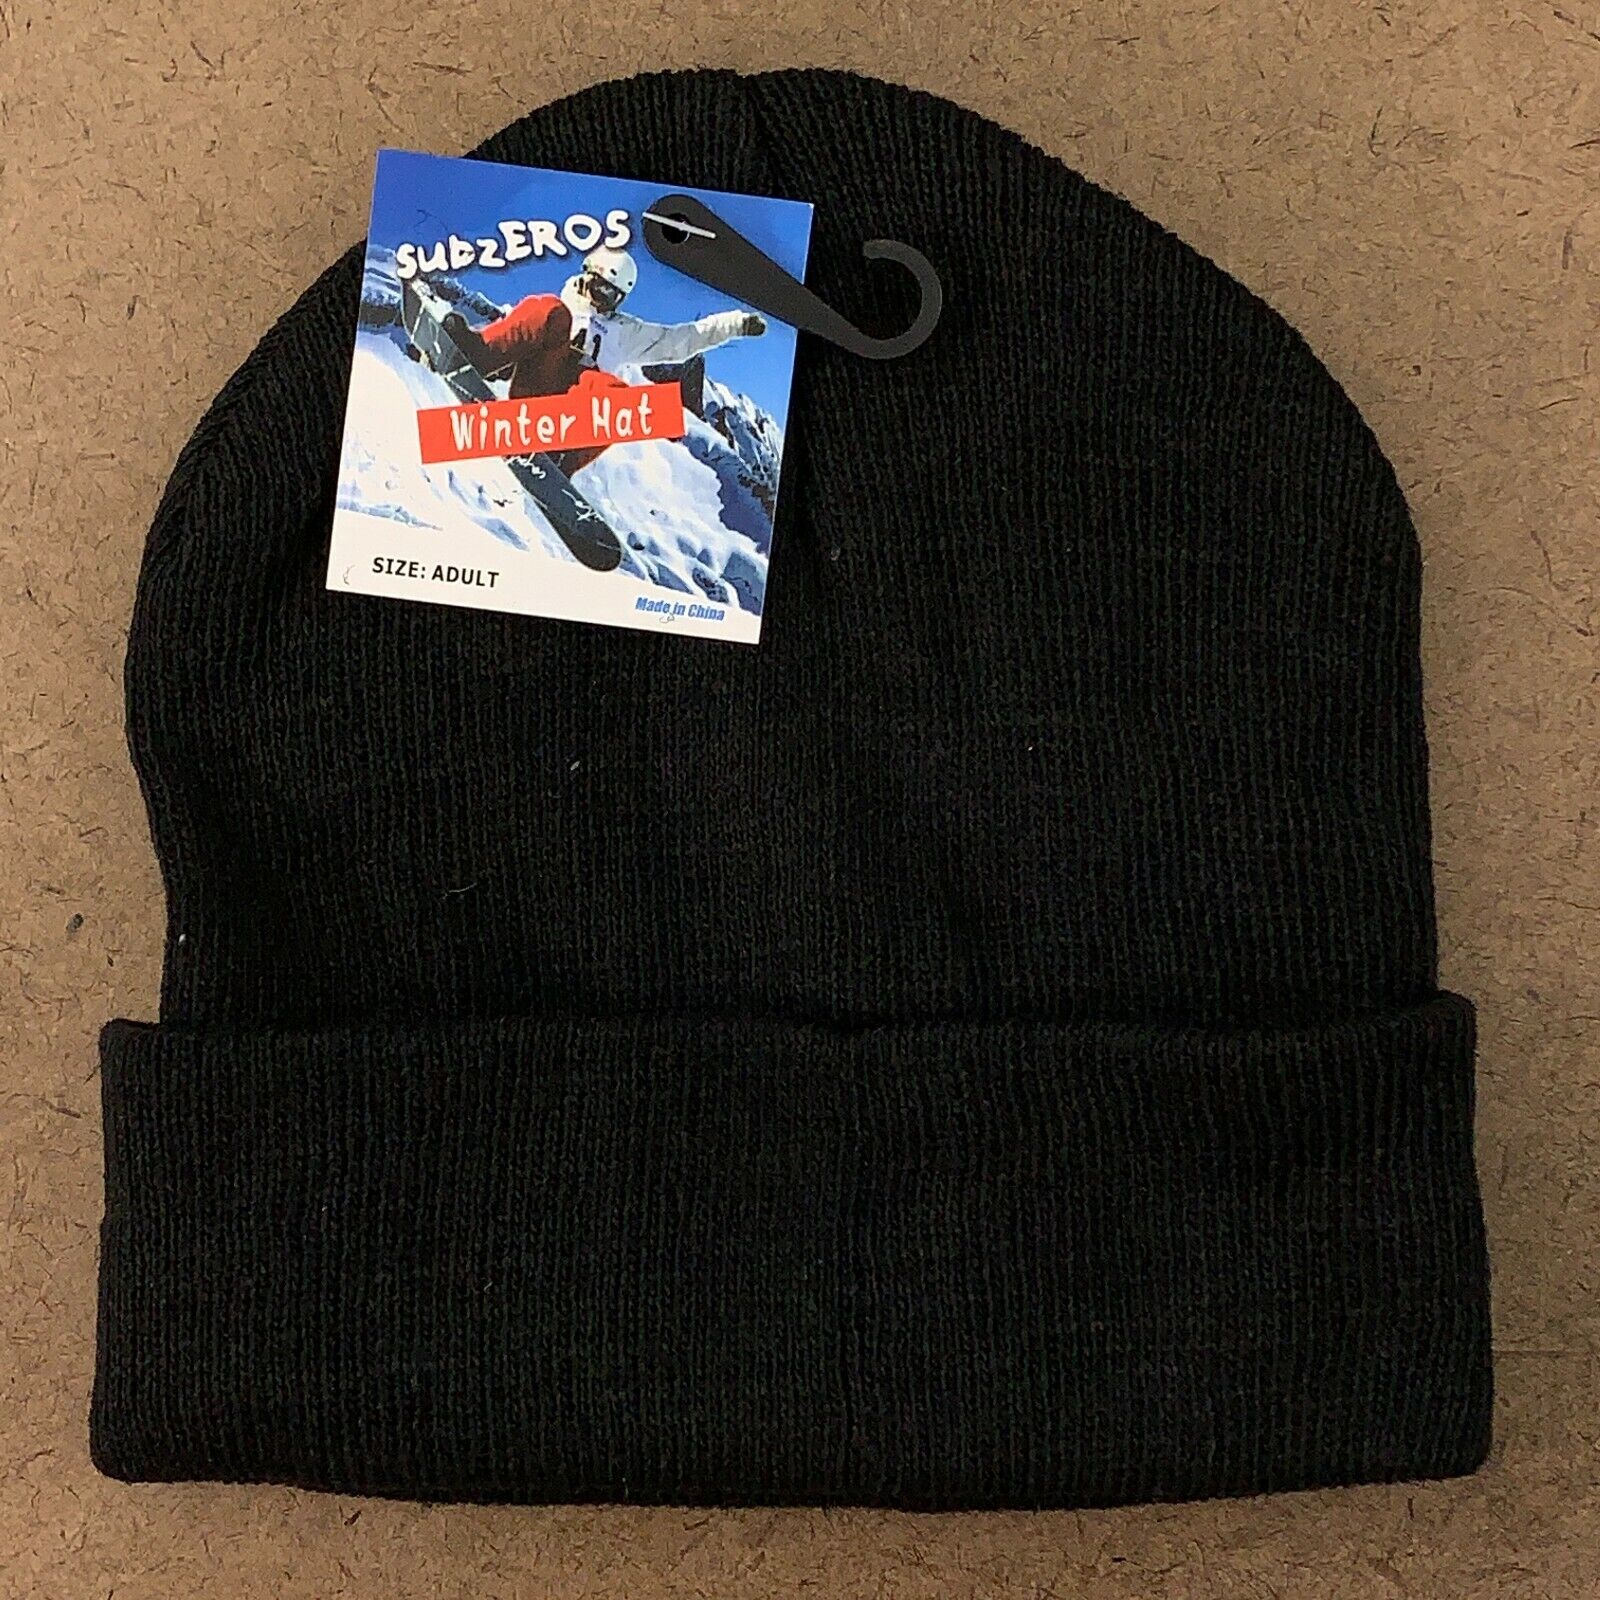 SubZeros Adult Large-scale sale One 5% OFF Size Black Rib NWT Winter Beanie Knit Hat